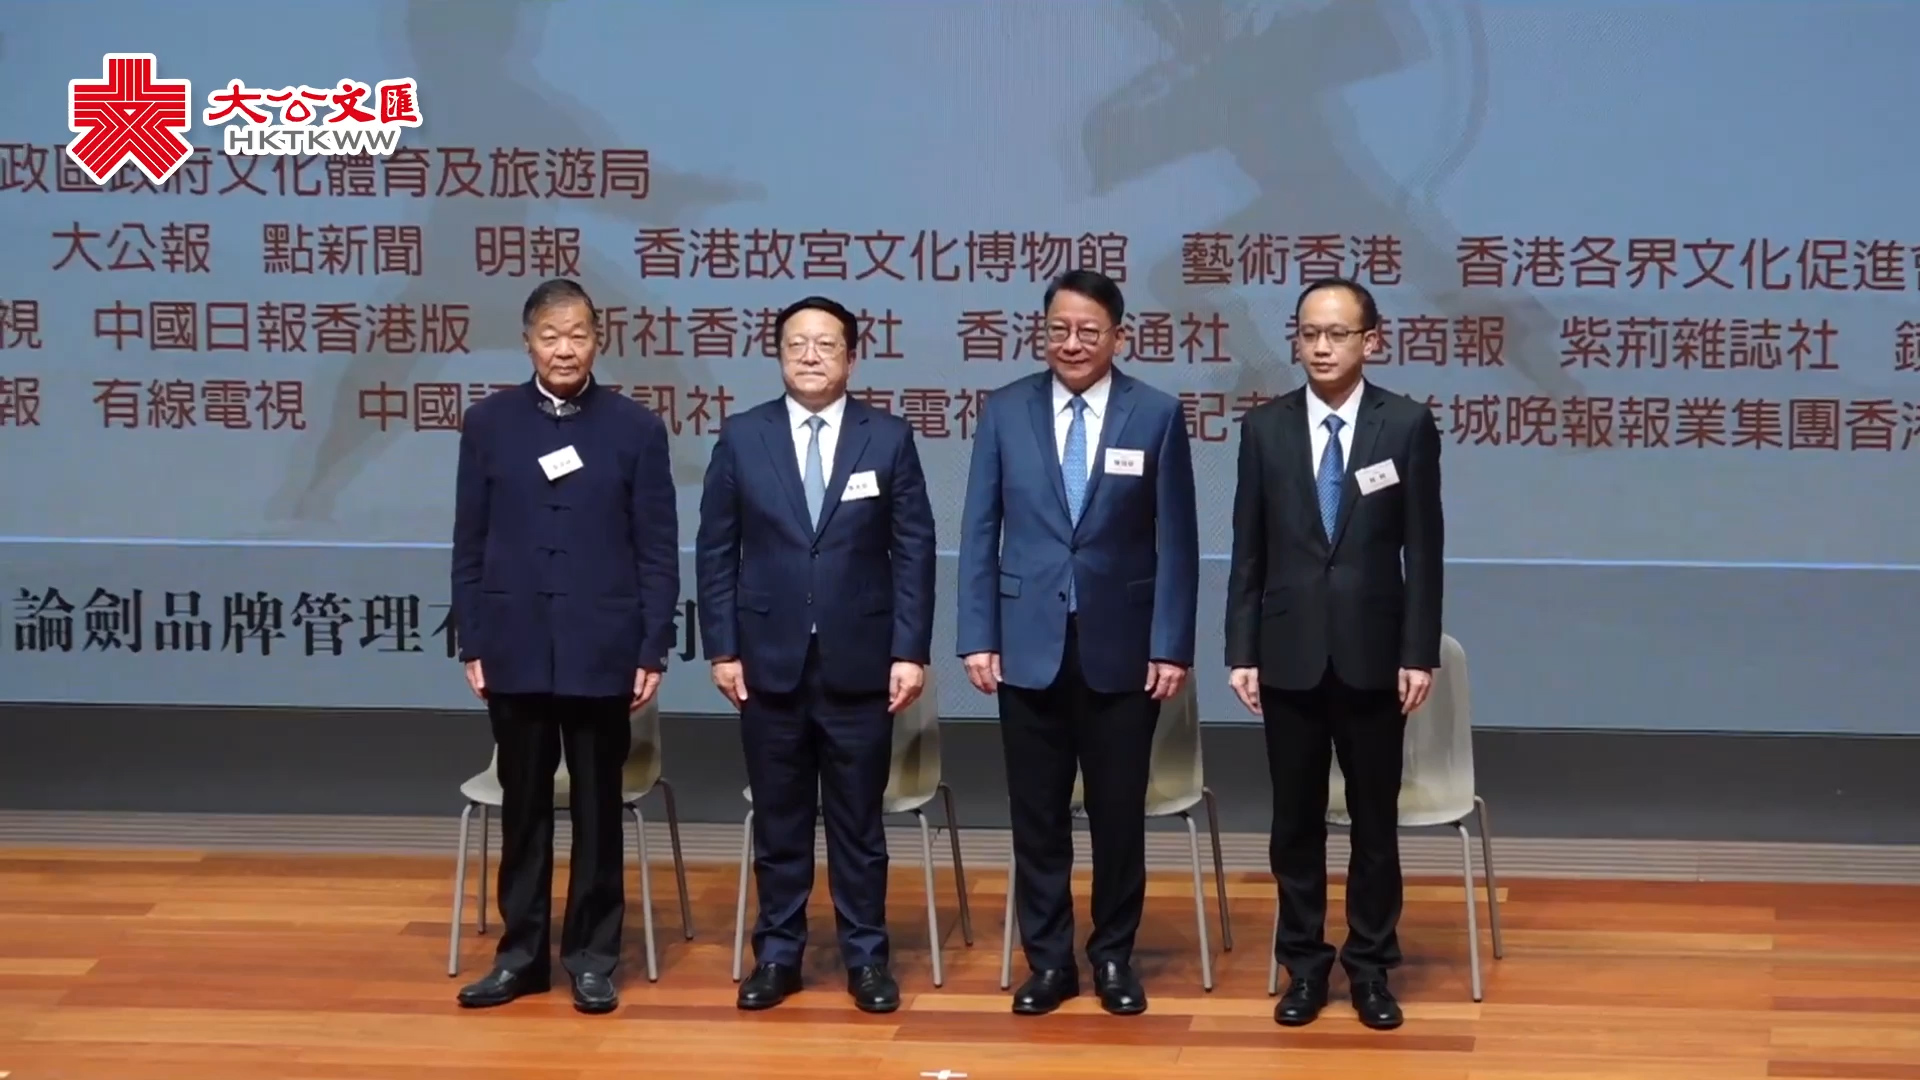  The Centennial Birthday Forum of Jin Yong, a joint news office, hopes to spread the feelings of family and country with the spirit of heroes in his works